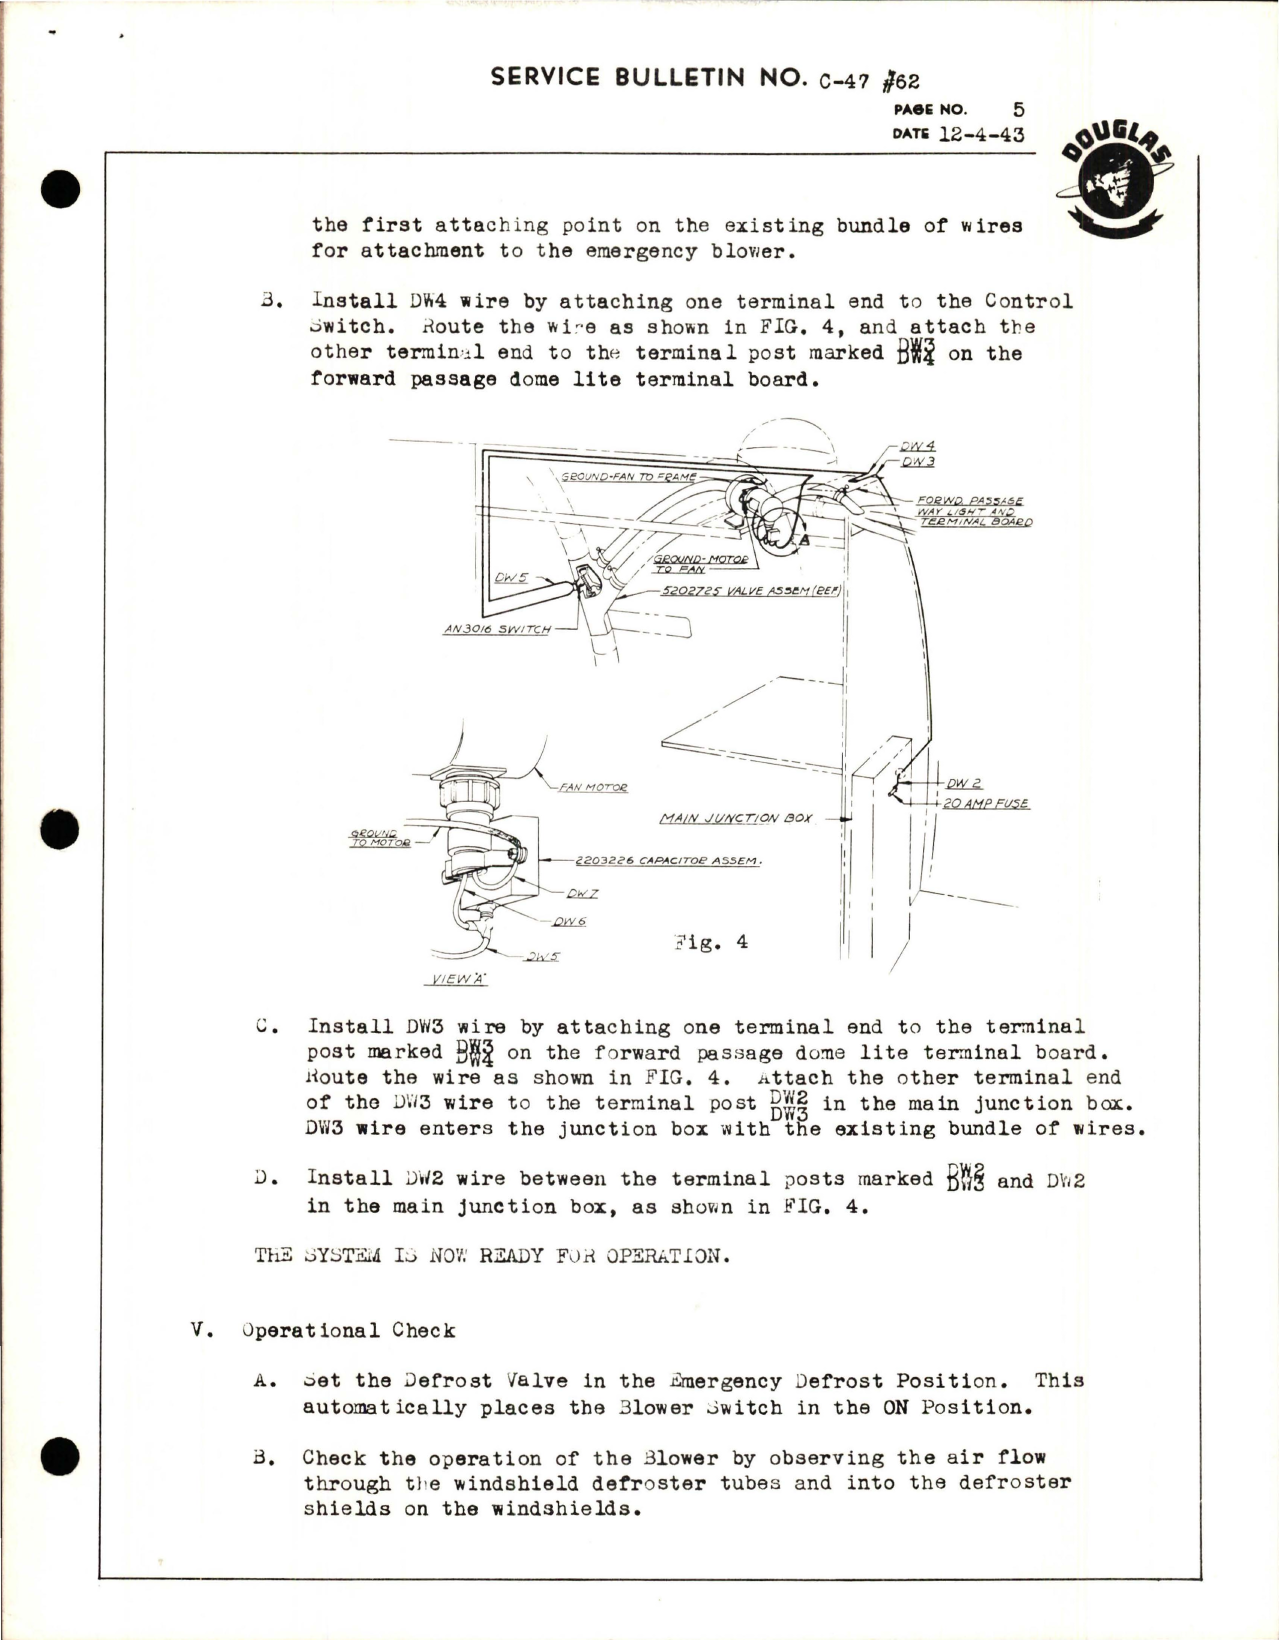 Sample page 5 from AirCorps Library document: Installation of Emergency Defrost System for Pilot's and Co-Pilot's Windshields